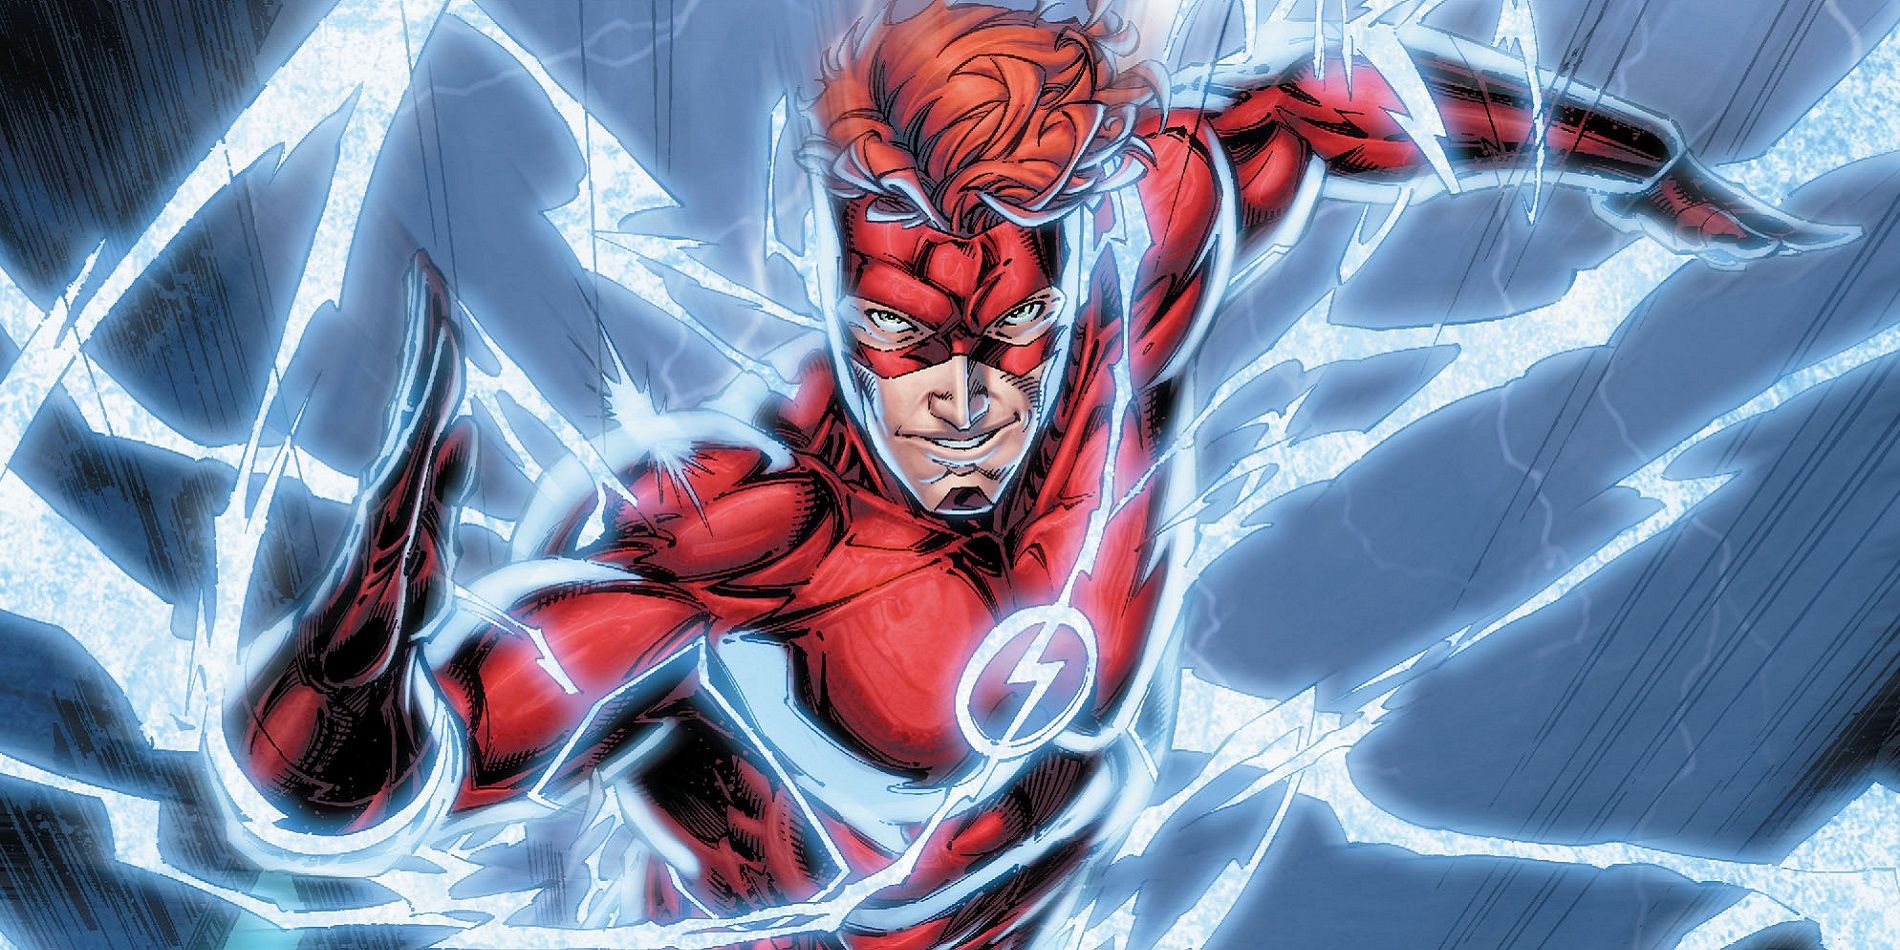 Wally West Deserves To Be DCs Main Flash